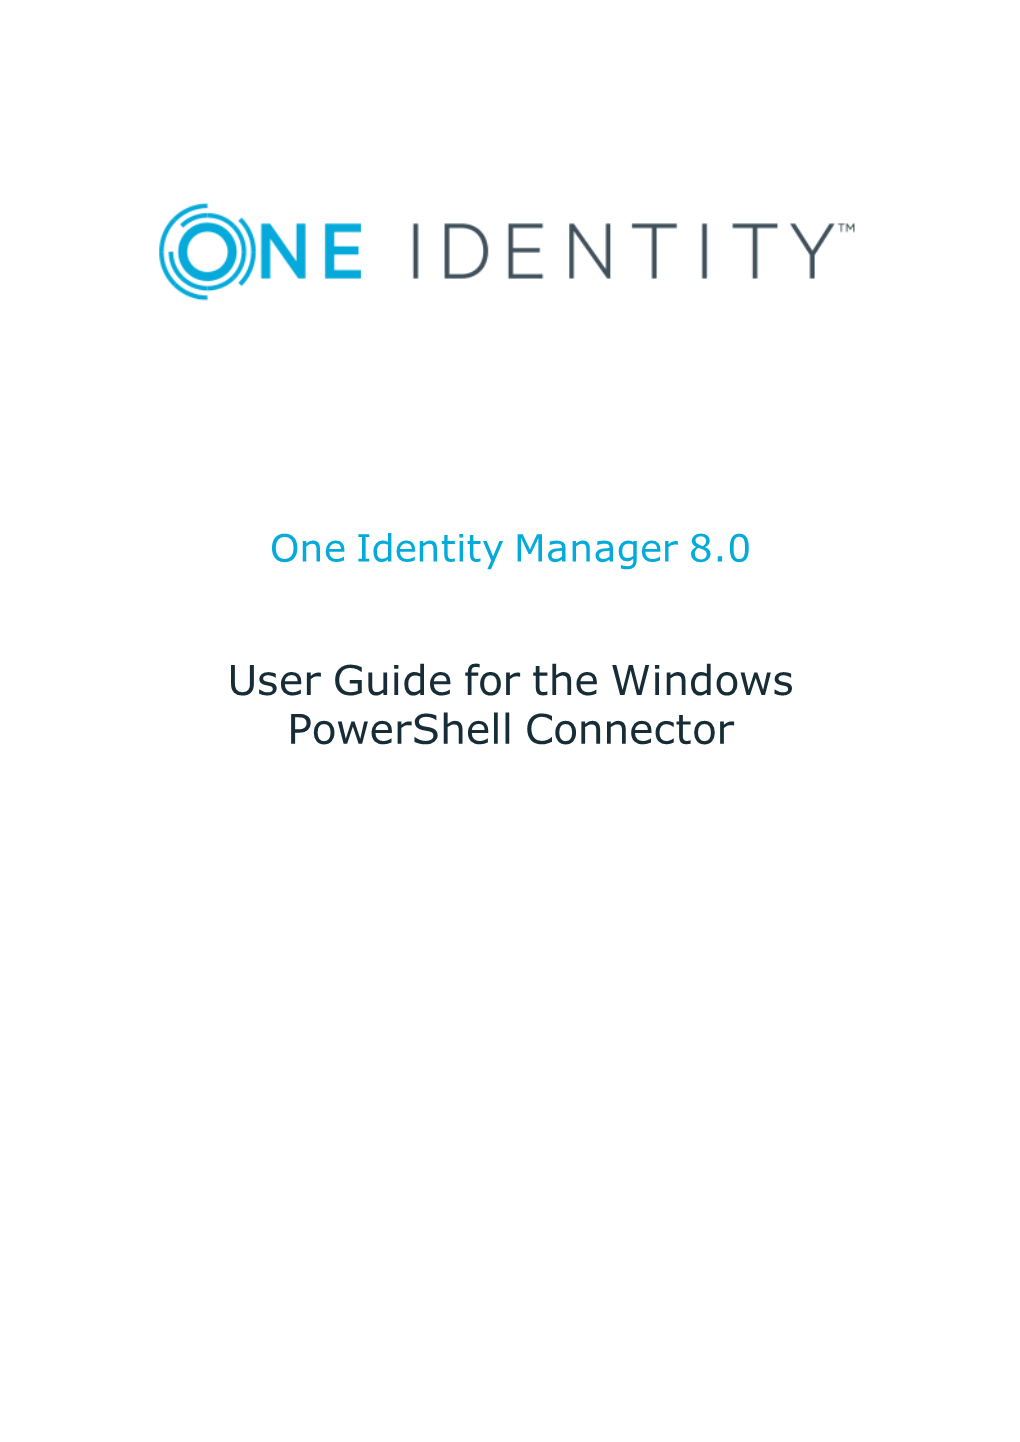 One Identity Manager Windows Powershell Connector User Guide